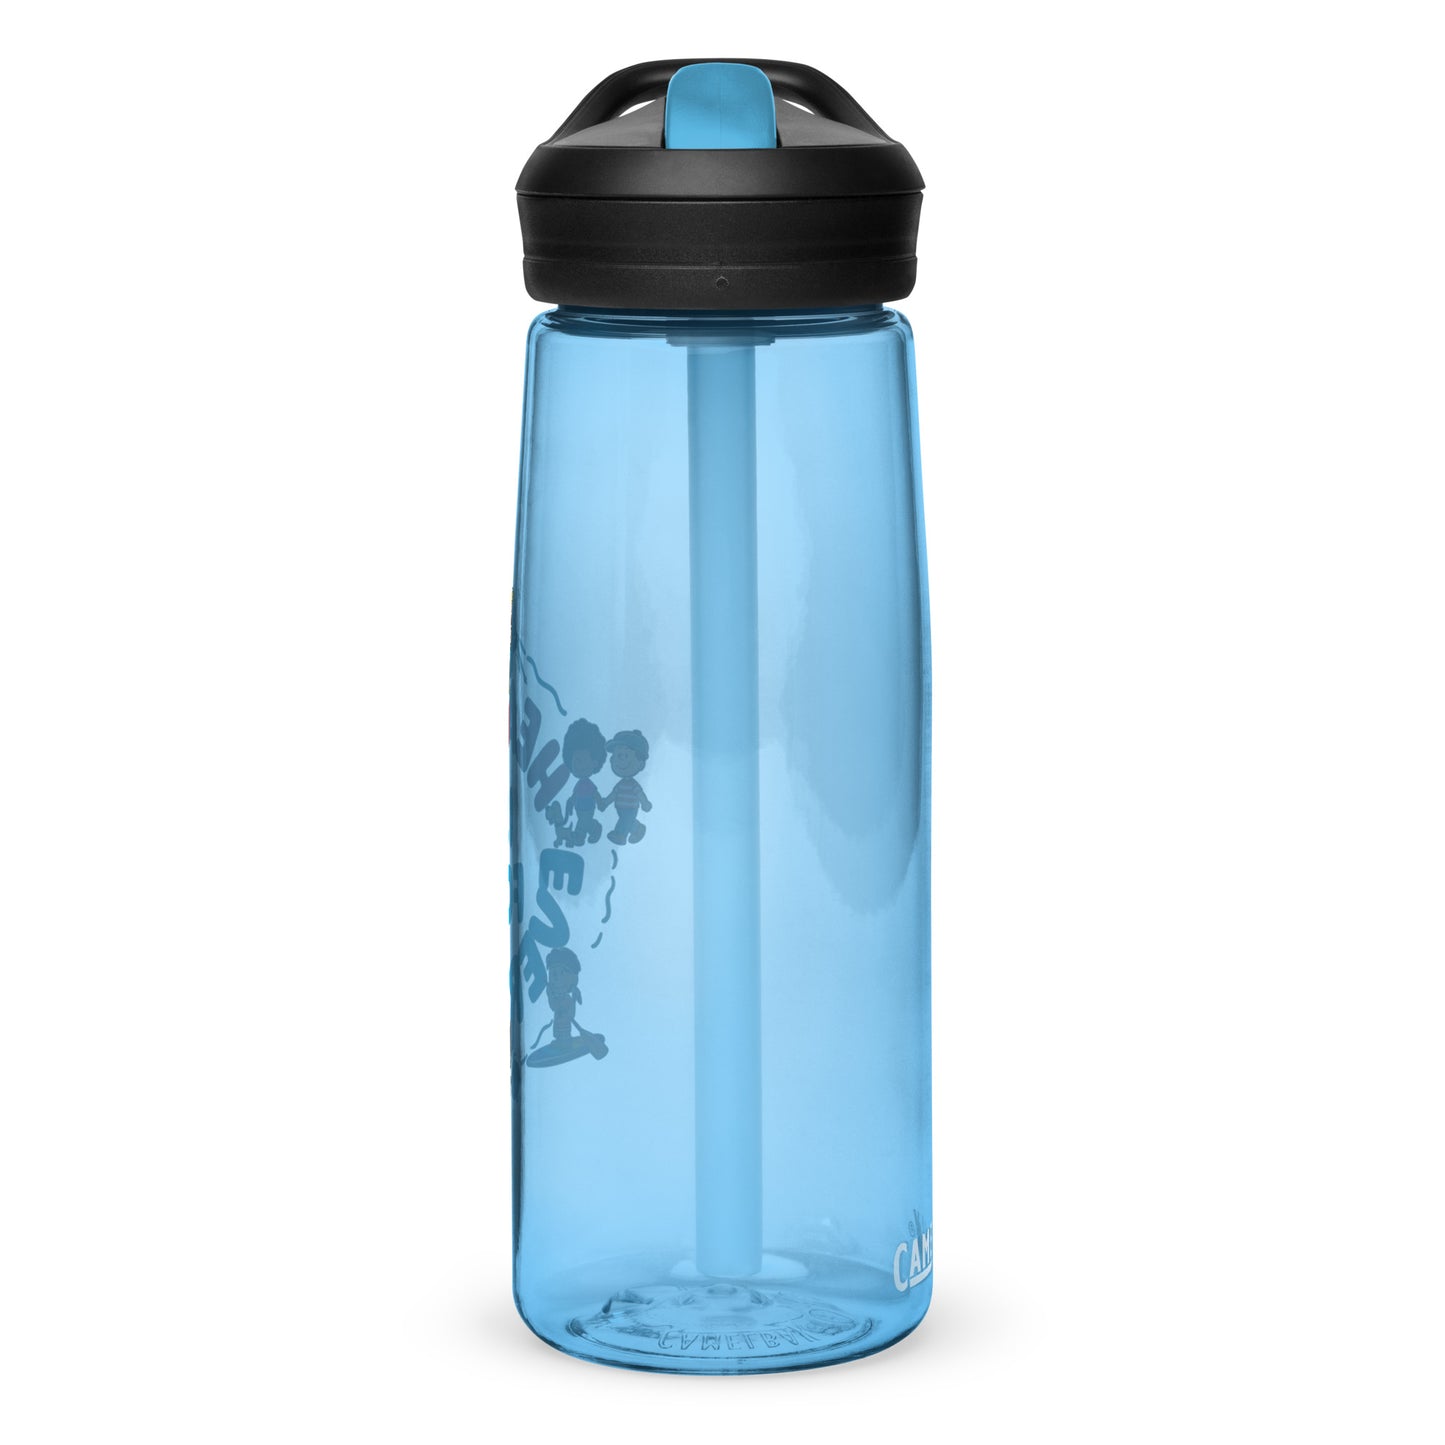 Health Is For Everyone Sports water bottle